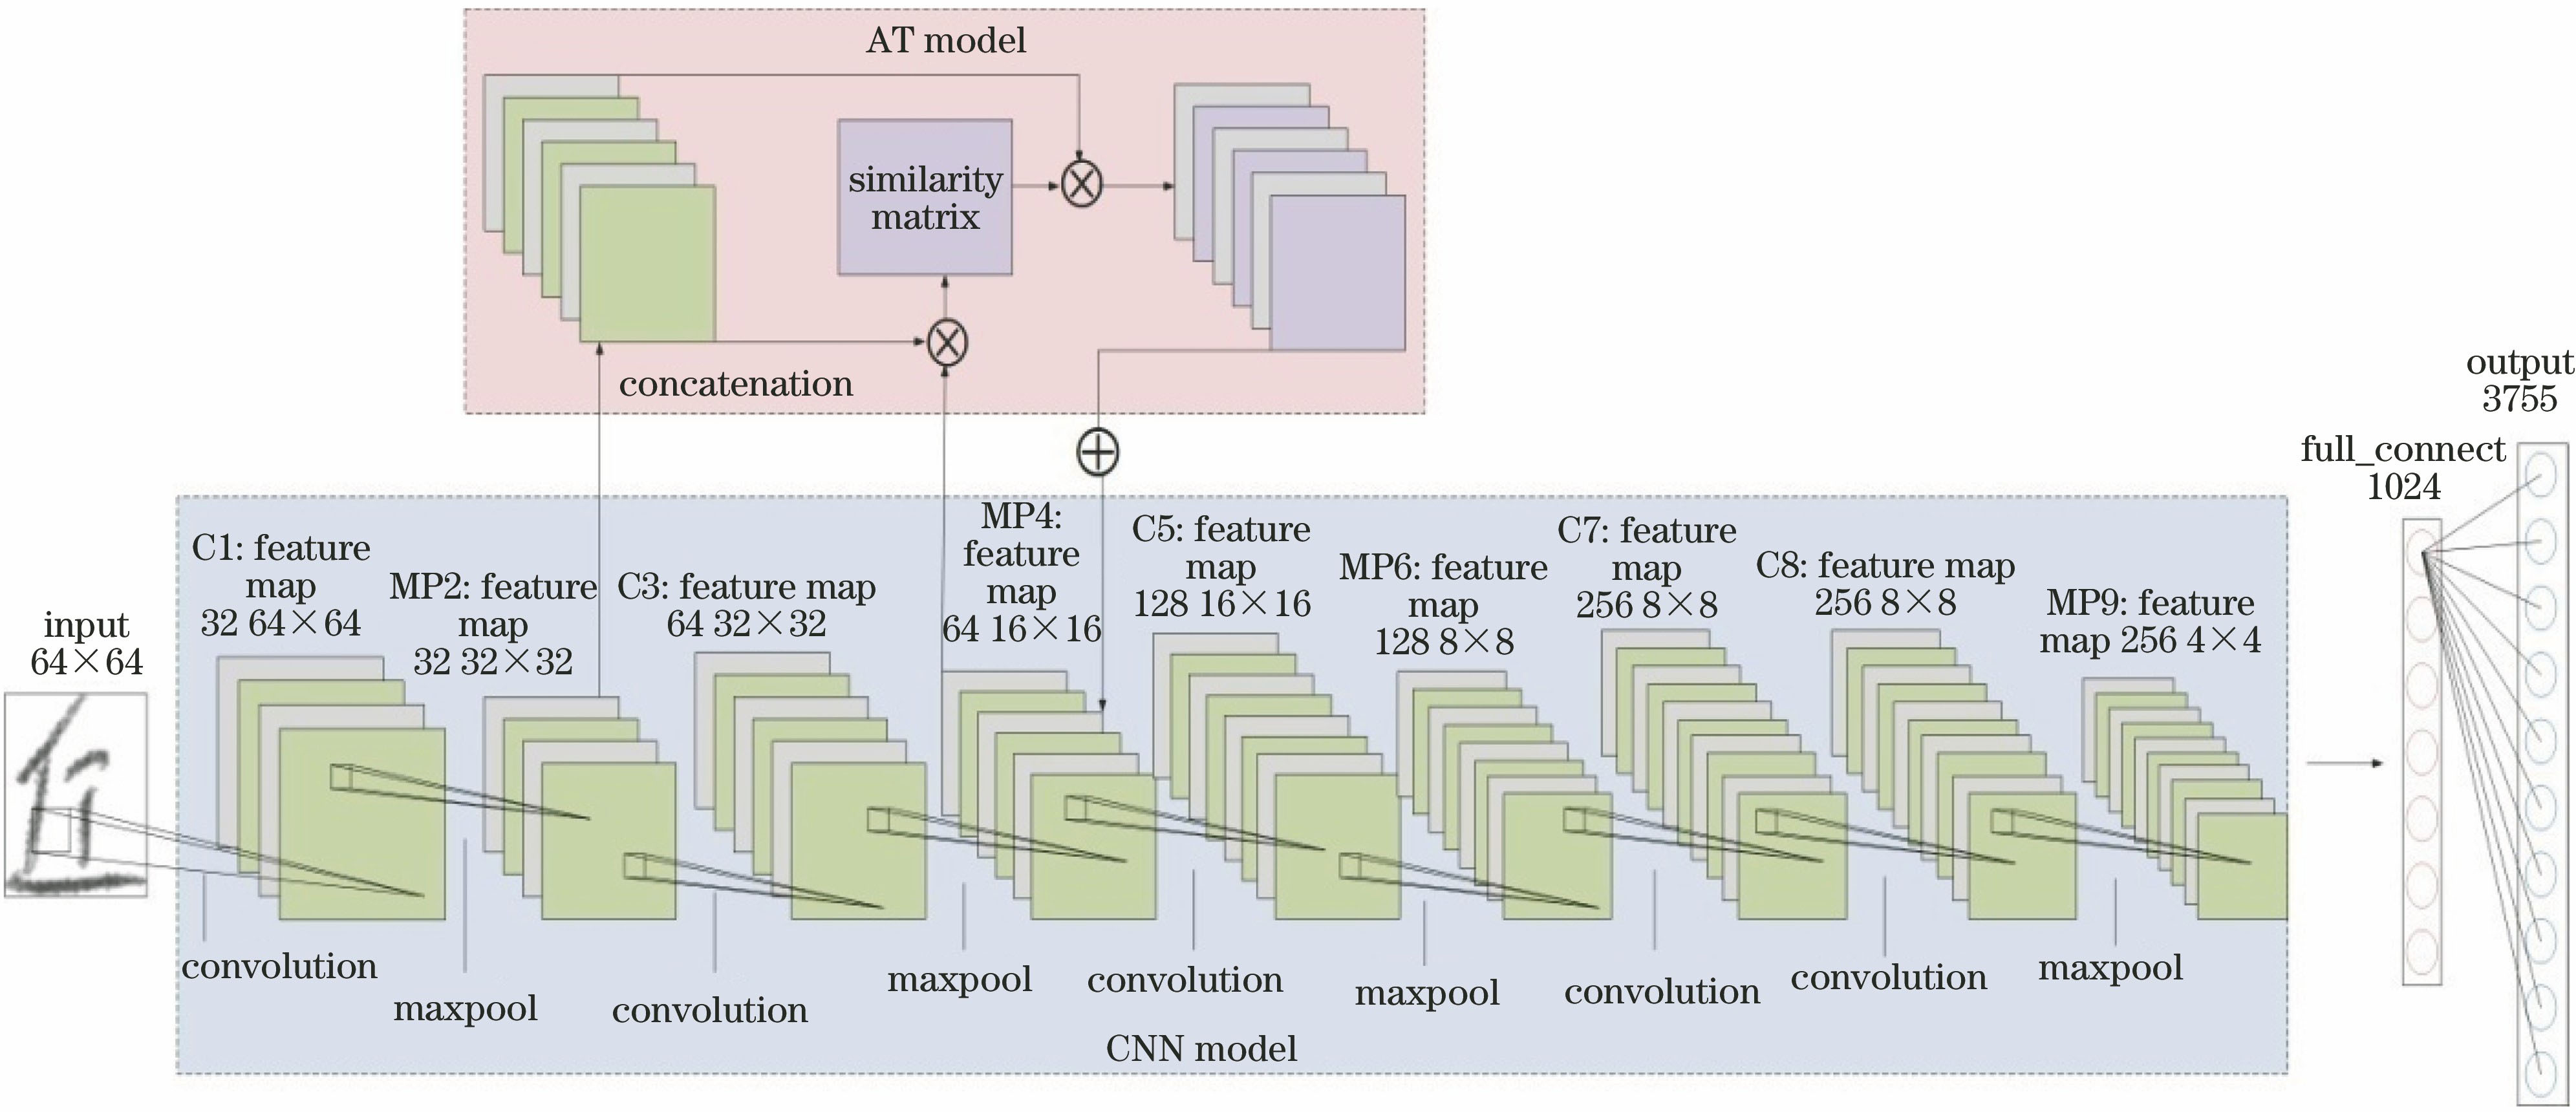 AT-CNN model structure